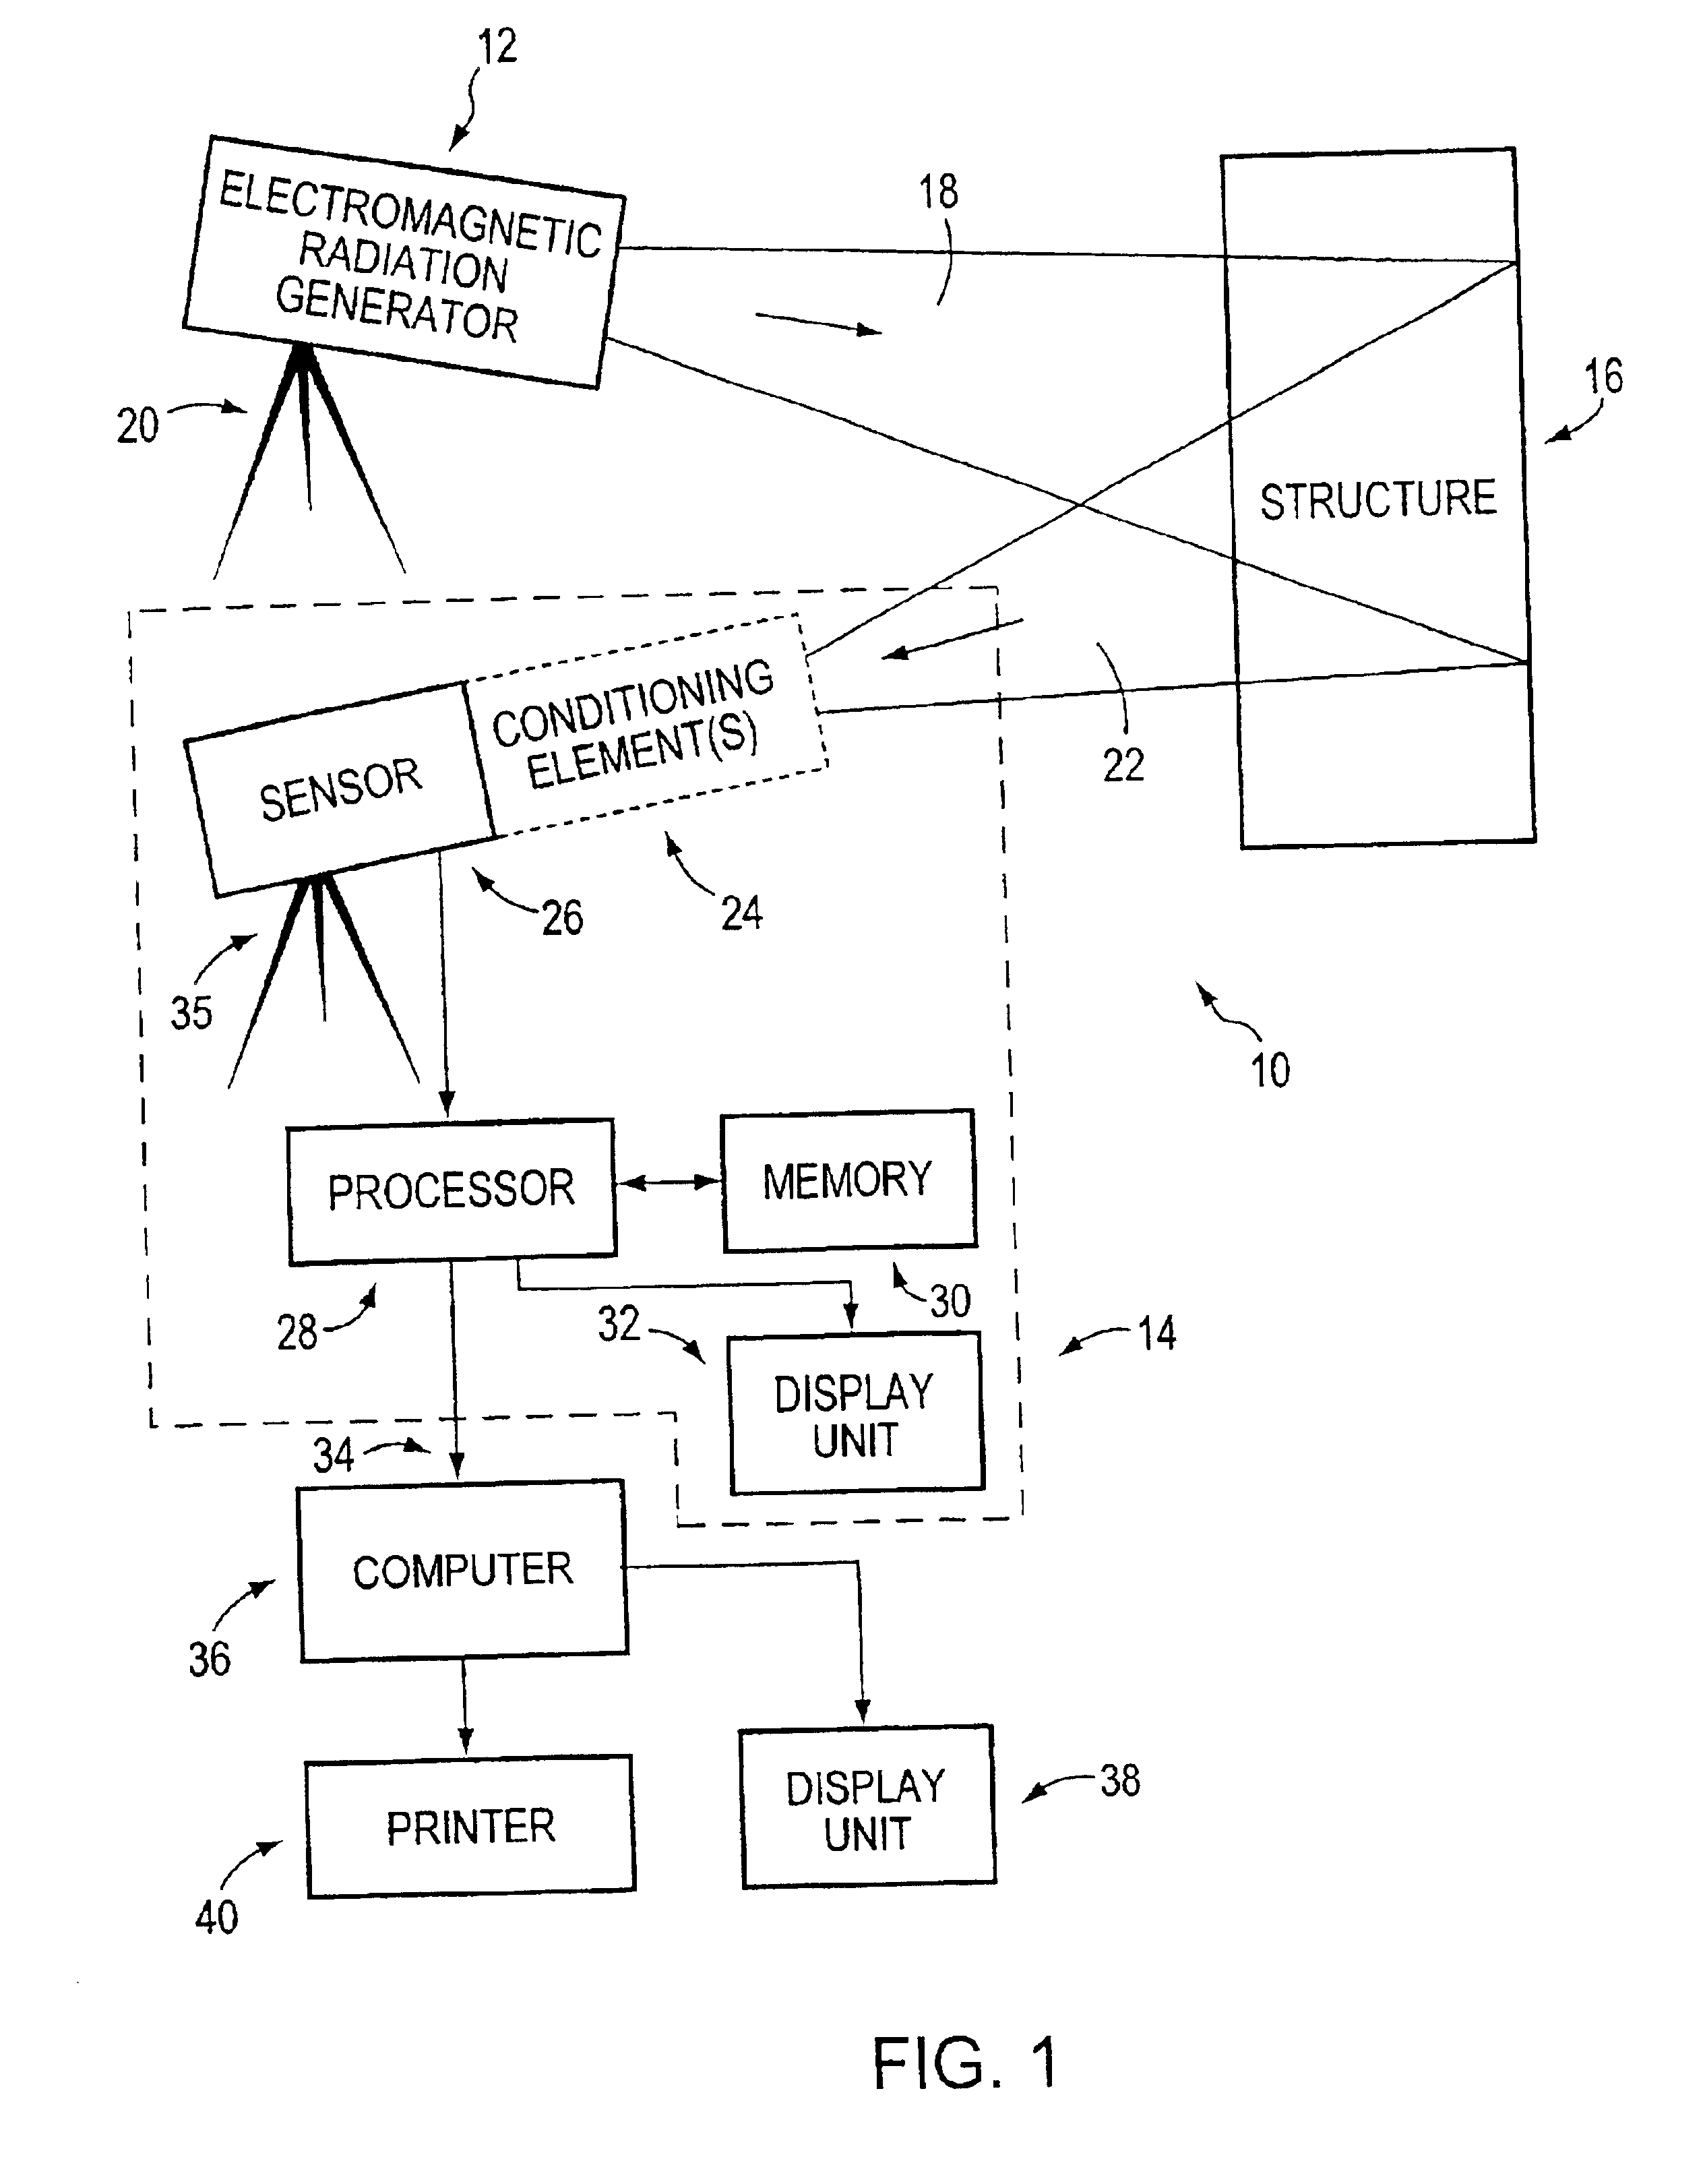 Water detection and source identification methods for structures using electromagnetic radiation spectroscopy